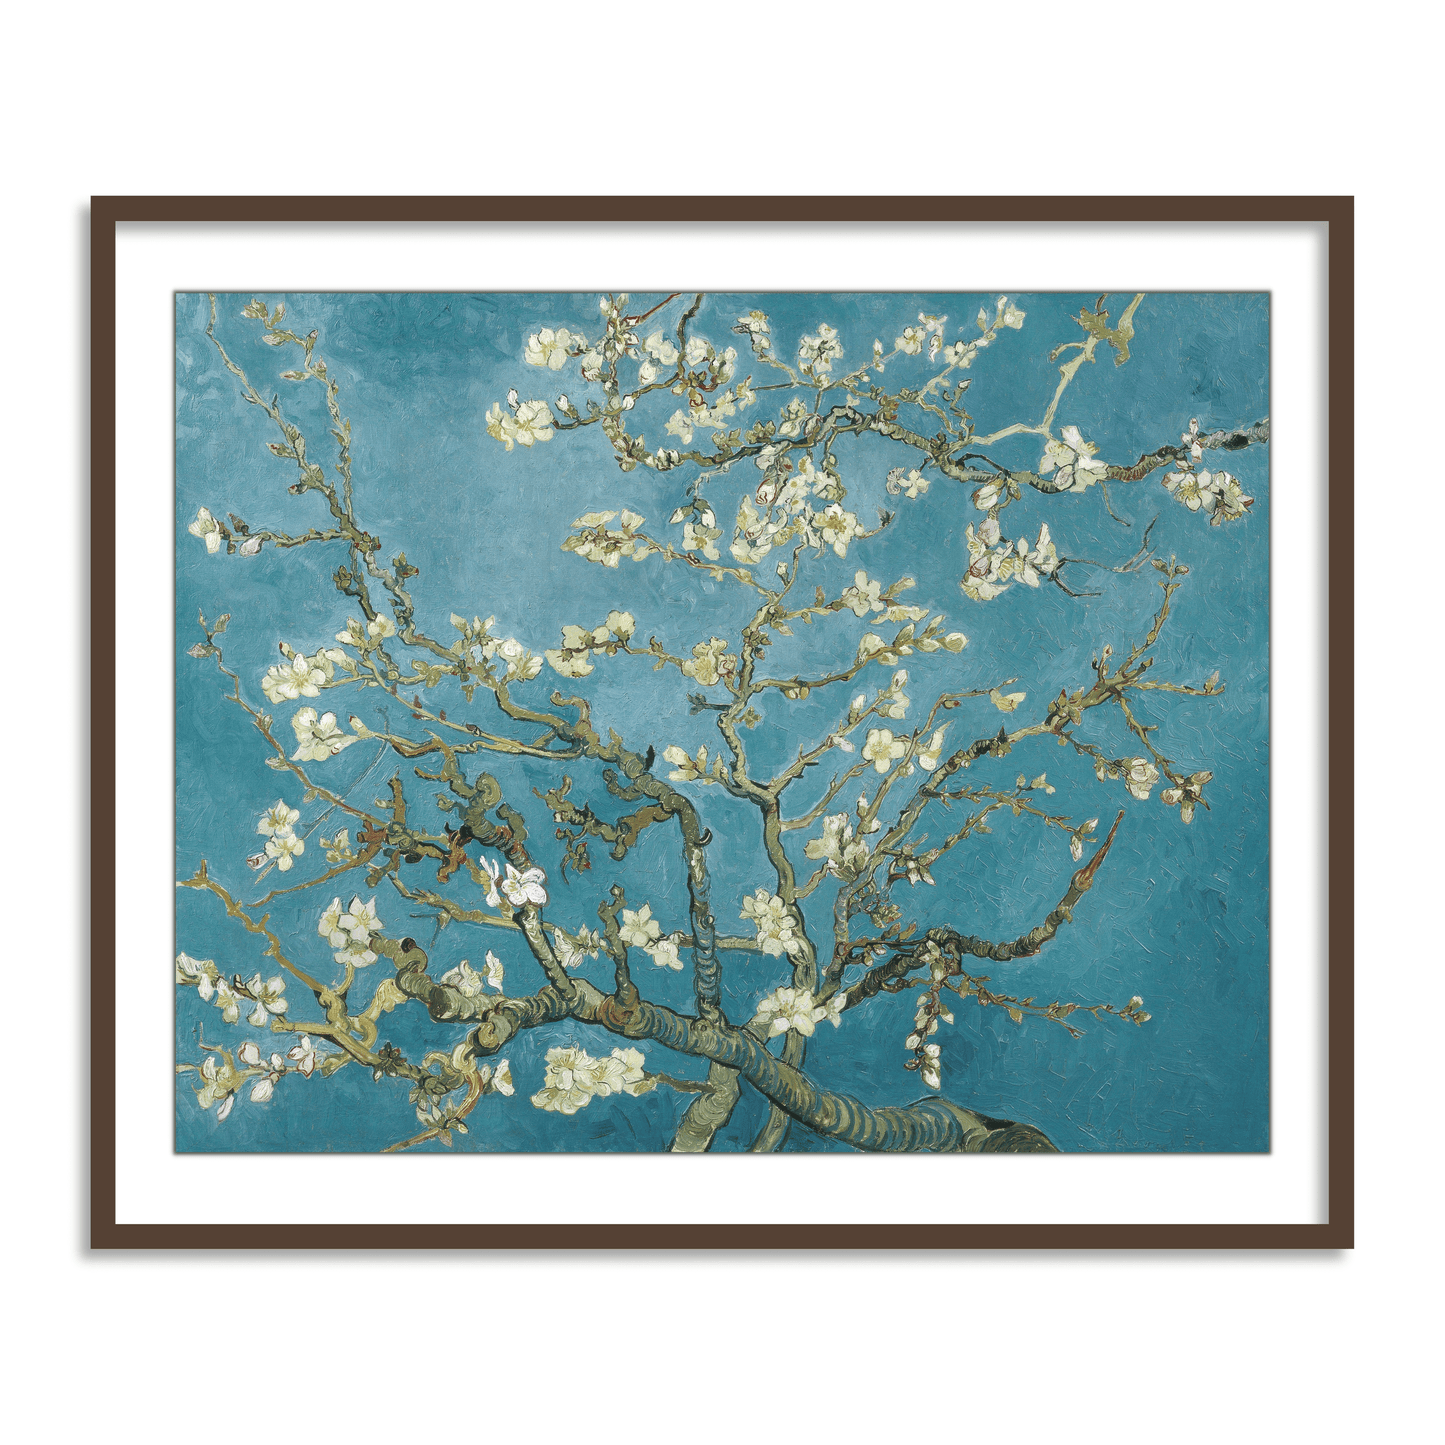 Almond blossom by Vincent Van Gogh Famous Painting Wall Art